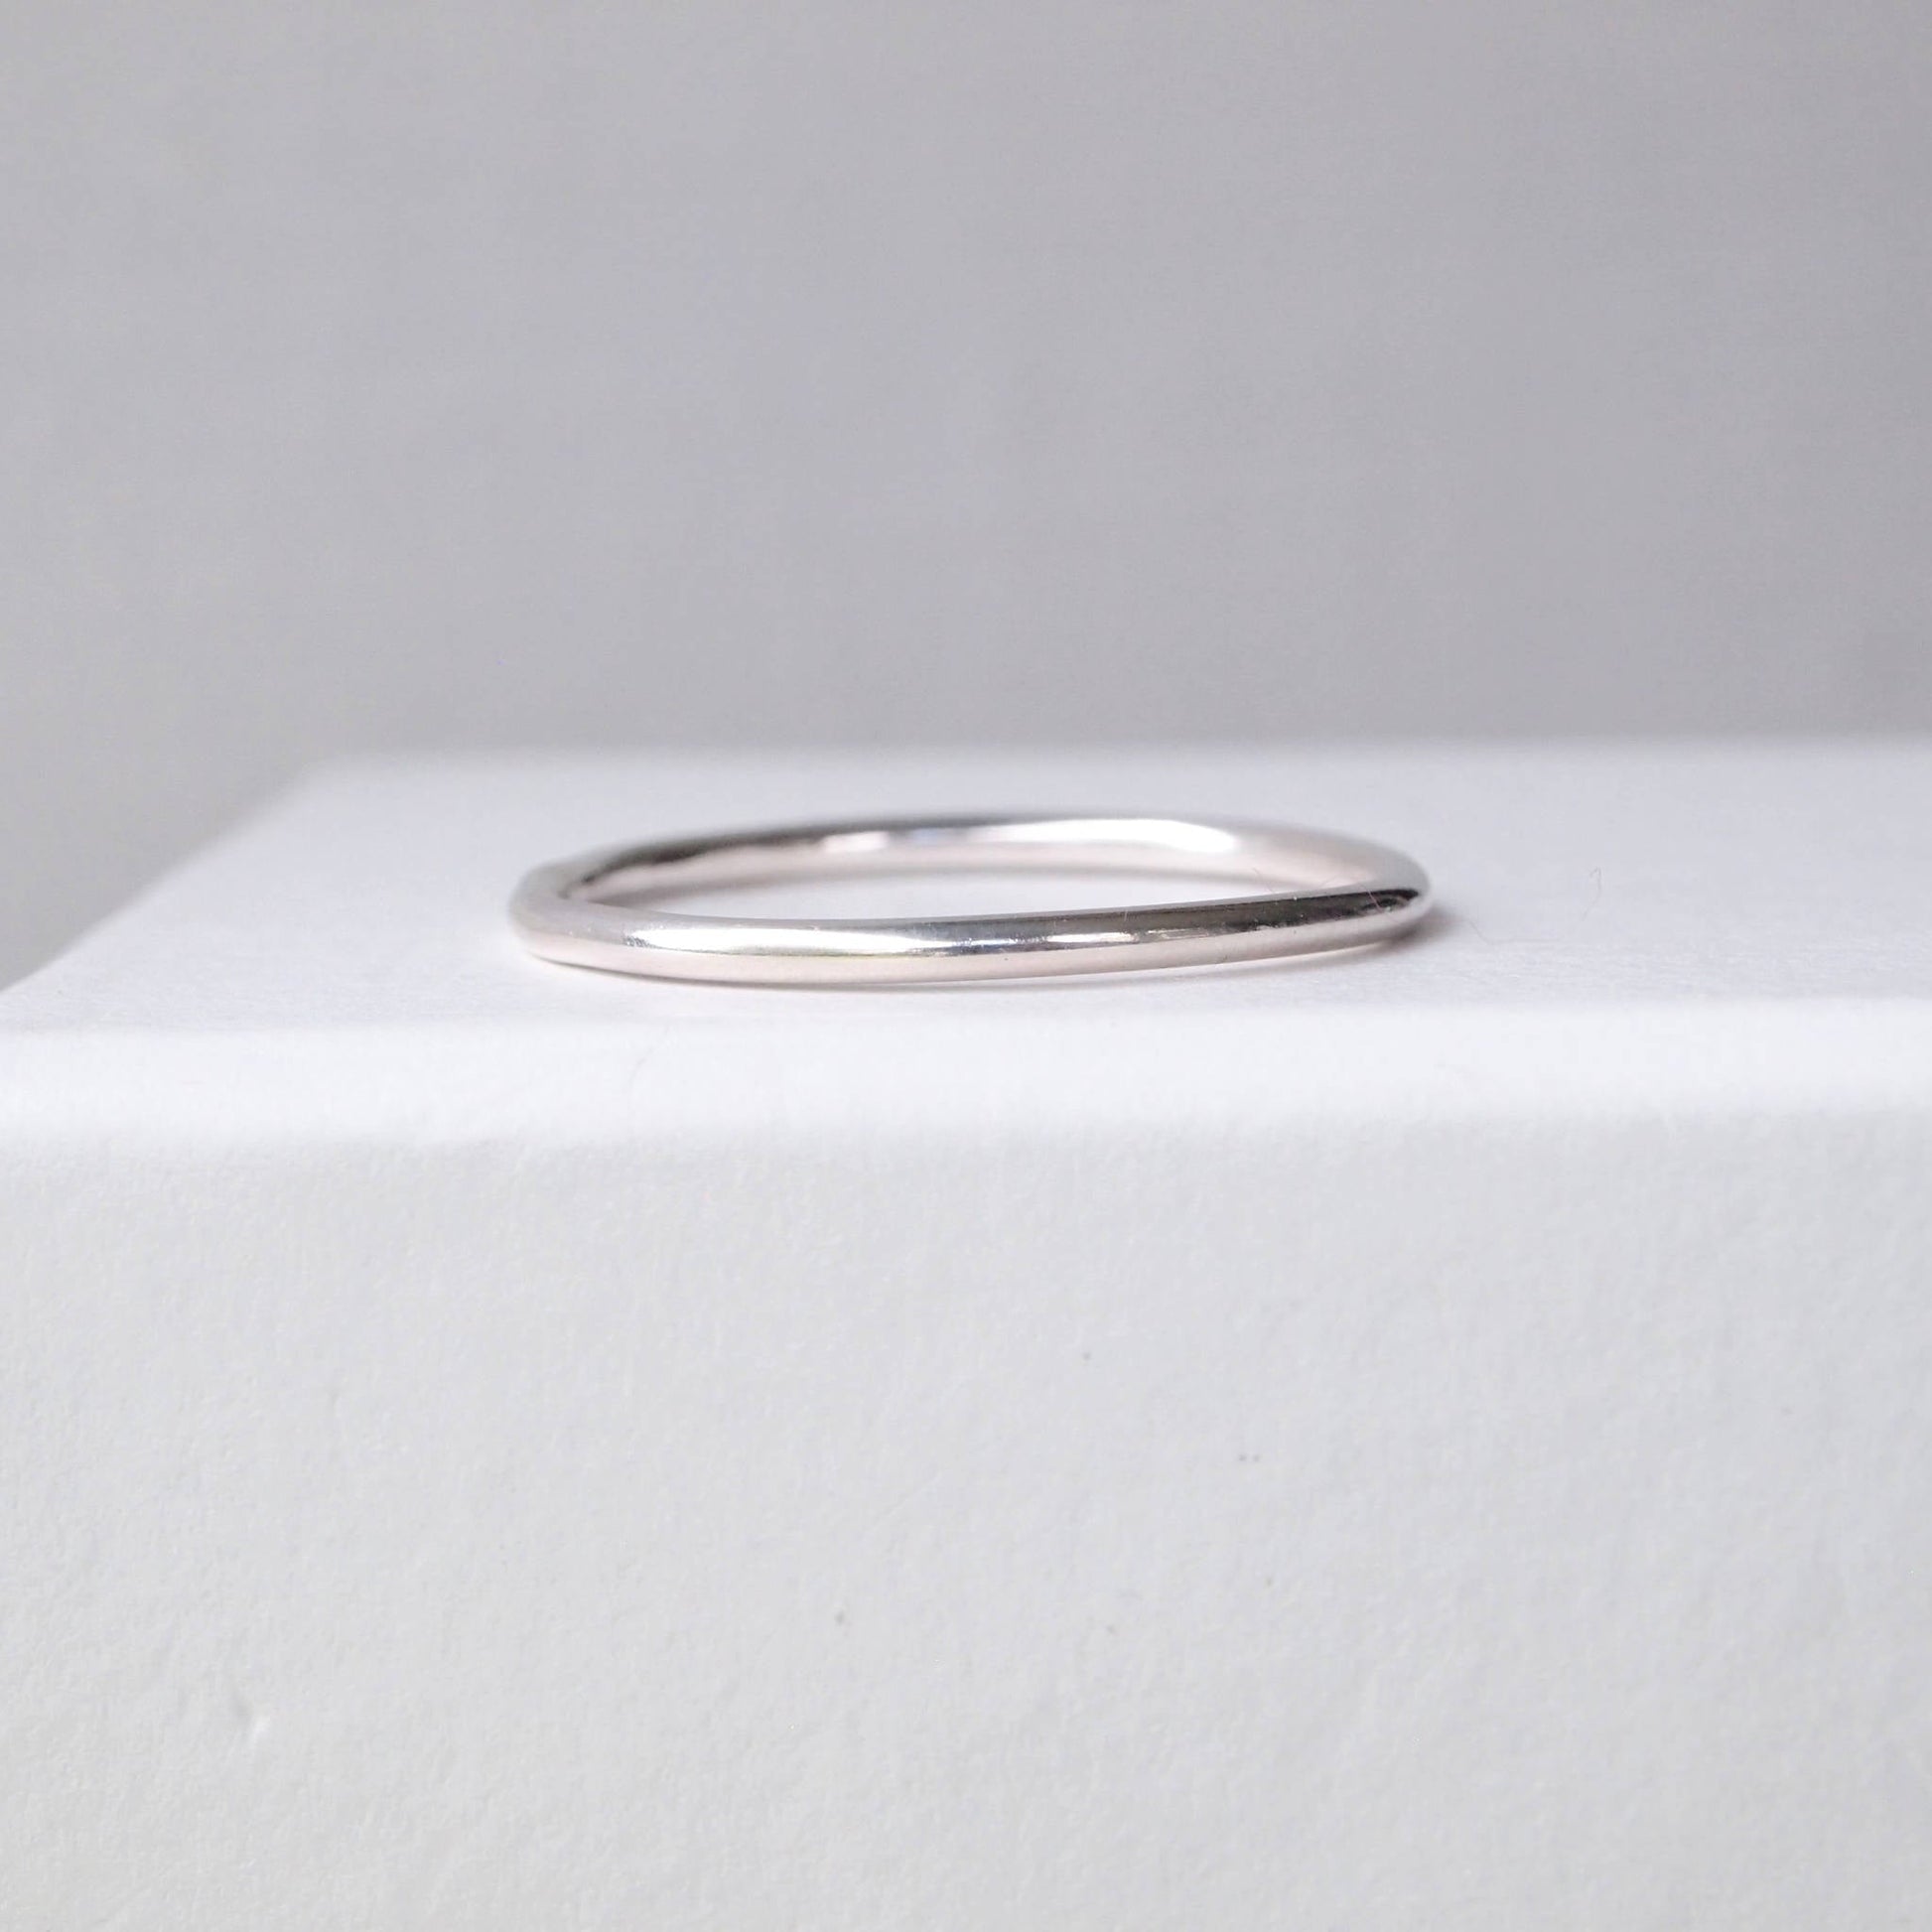 Plain round profile wedding plain band with no details. minimalist sterling Silver ring pictured on a white background. Handmade to your ring size by maram jewellery in Edinburgh UK